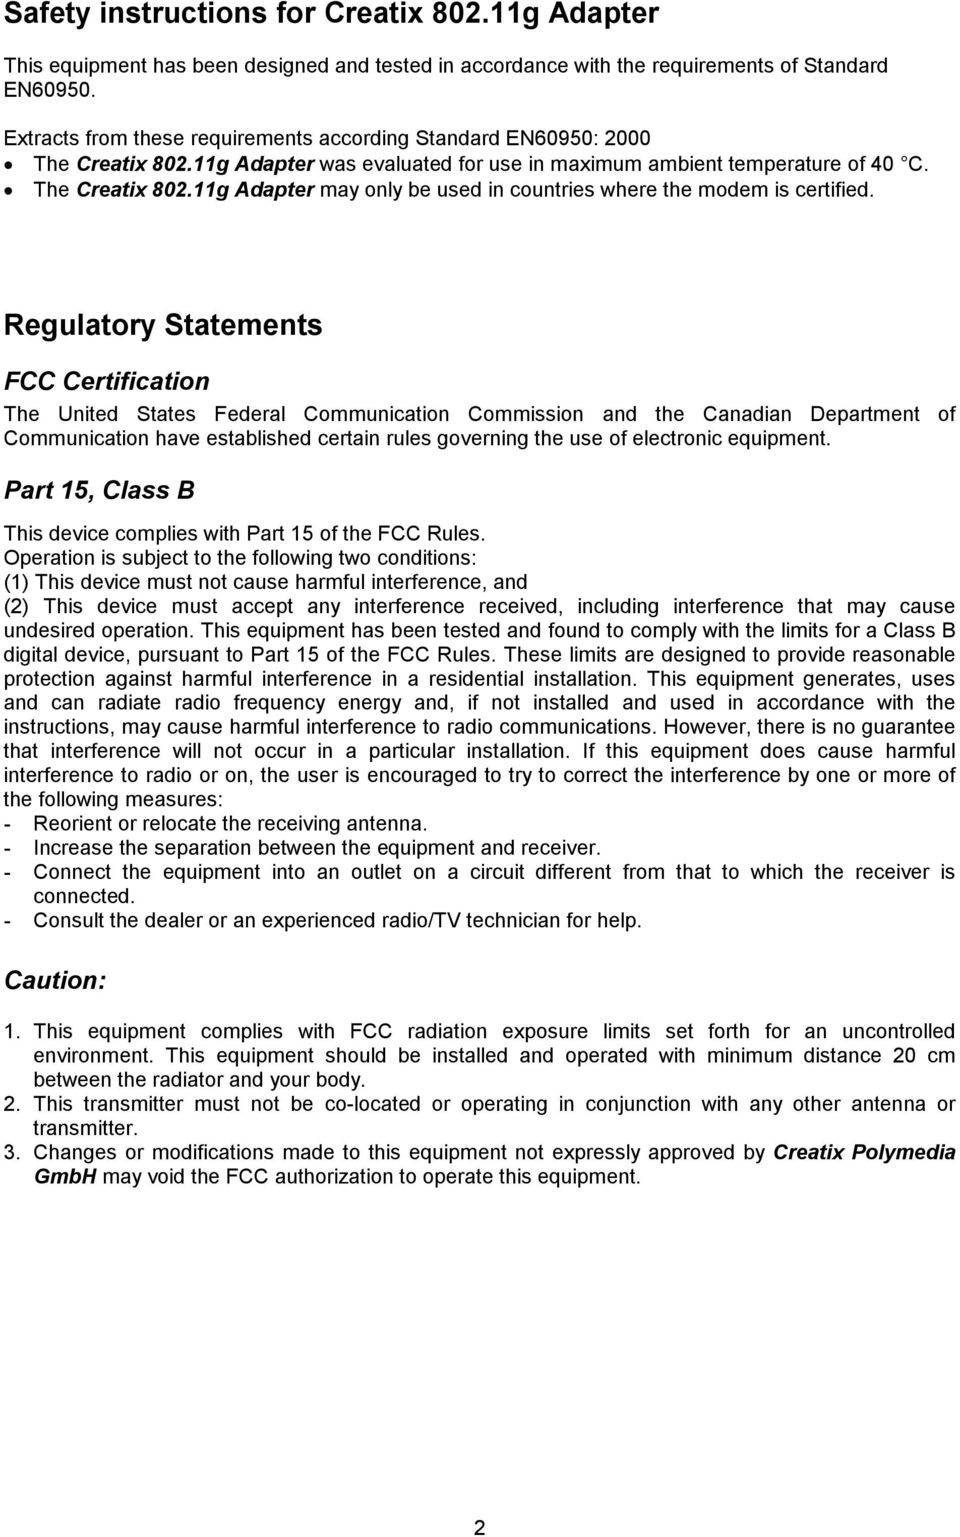 Regulatory Statements FCC Certification The United States Federal Communication Commission and the Canadian Department of Communication have established certain rules governing the use of electronic